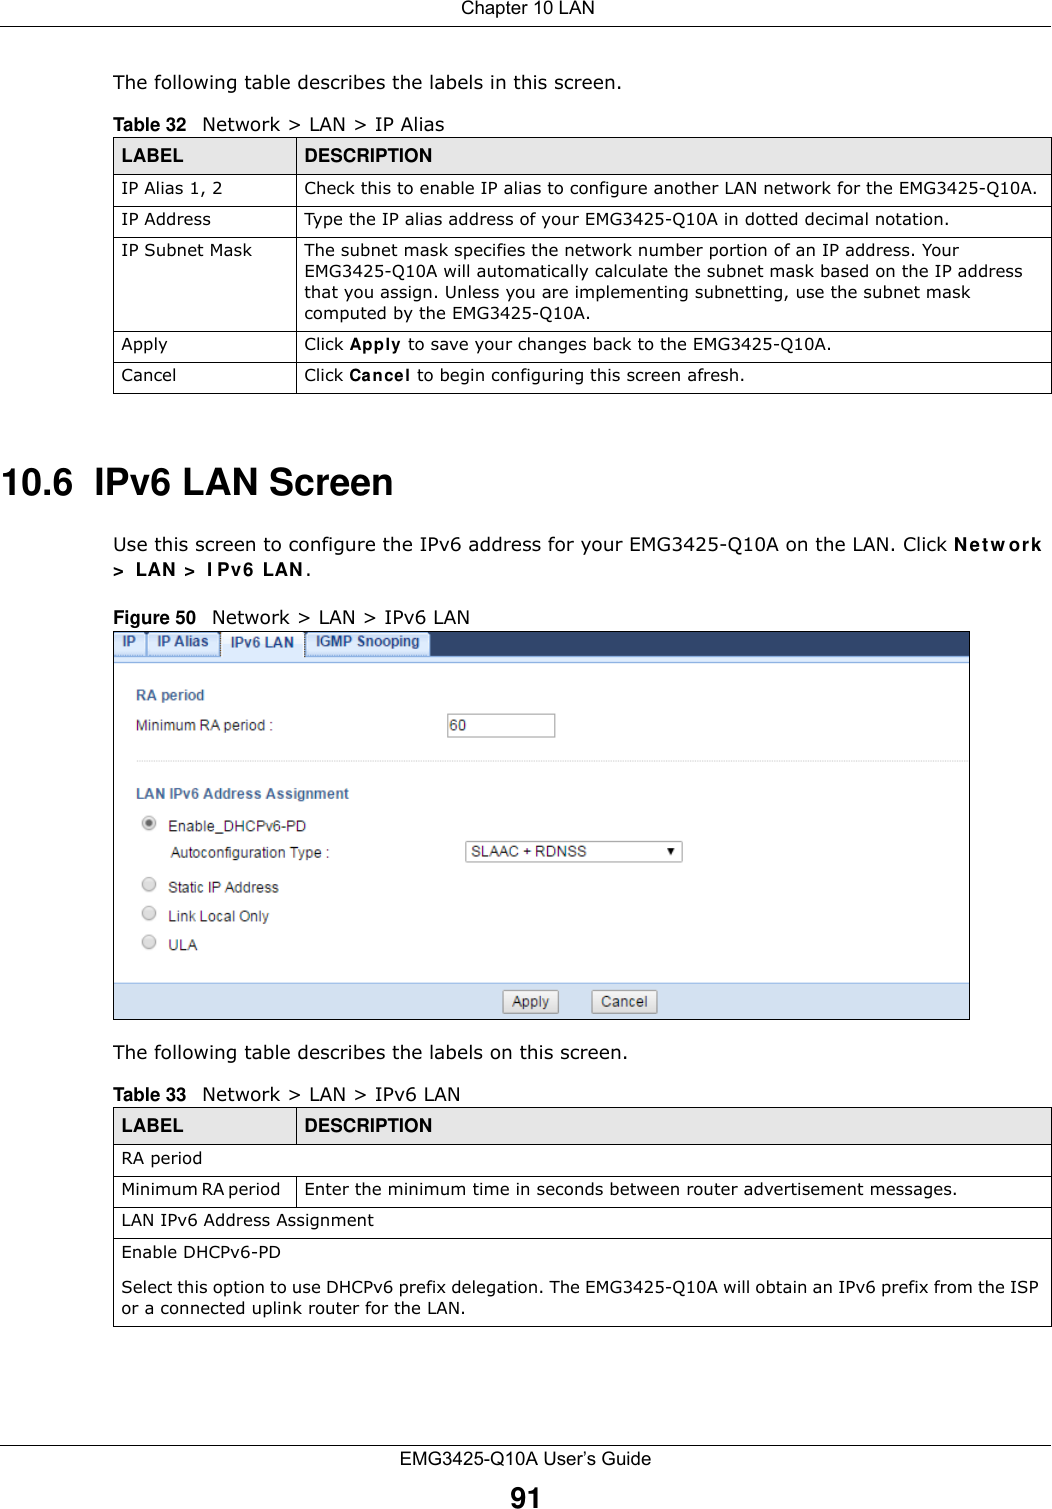  Chapter 10 LANEMG3425-Q10A User’s Guide91The following table describes the labels in this screen.10.6  IPv6 LAN ScreenUse this screen to configure the IPv6 address for your EMG3425-Q10A on the LAN. Click Net w ork &gt;  LAN  &gt;  I Pv6  LAN .Figure 50   Network &gt; LAN &gt; IPv6 LAN The following table describes the labels on this screen.Table 32   Network &gt; LAN &gt; IP AliasLABEL DESCRIPTIONIP Alias 1, 2 Check this to enable IP alias to configure another LAN network for the EMG3425-Q10A.IP Address Type the IP alias address of your EMG3425-Q10A in dotted decimal notation.IP Subnet Mask The subnet mask specifies the network number portion of an IP address. Your EMG3425-Q10A will automatically calculate the subnet mask based on the IP address that you assign. Unless you are implementing subnetting, use the subnet mask computed by the EMG3425-Q10A.Apply Click Apply to save your changes back to the EMG3425-Q10A.Cancel Click Can cel to begin configuring this screen afresh.Table 33   Network &gt; LAN &gt; IPv6 LAN LABEL DESCRIPTIONRA periodMinimum RA period   Enter the minimum time in seconds between router advertisement messages.LAN IPv6 Address AssignmentEnable DHCPv6-PDSelect this option to use DHCPv6 prefix delegation. The EMG3425-Q10A will obtain an IPv6 prefix from the ISP or a connected uplink router for the LAN.